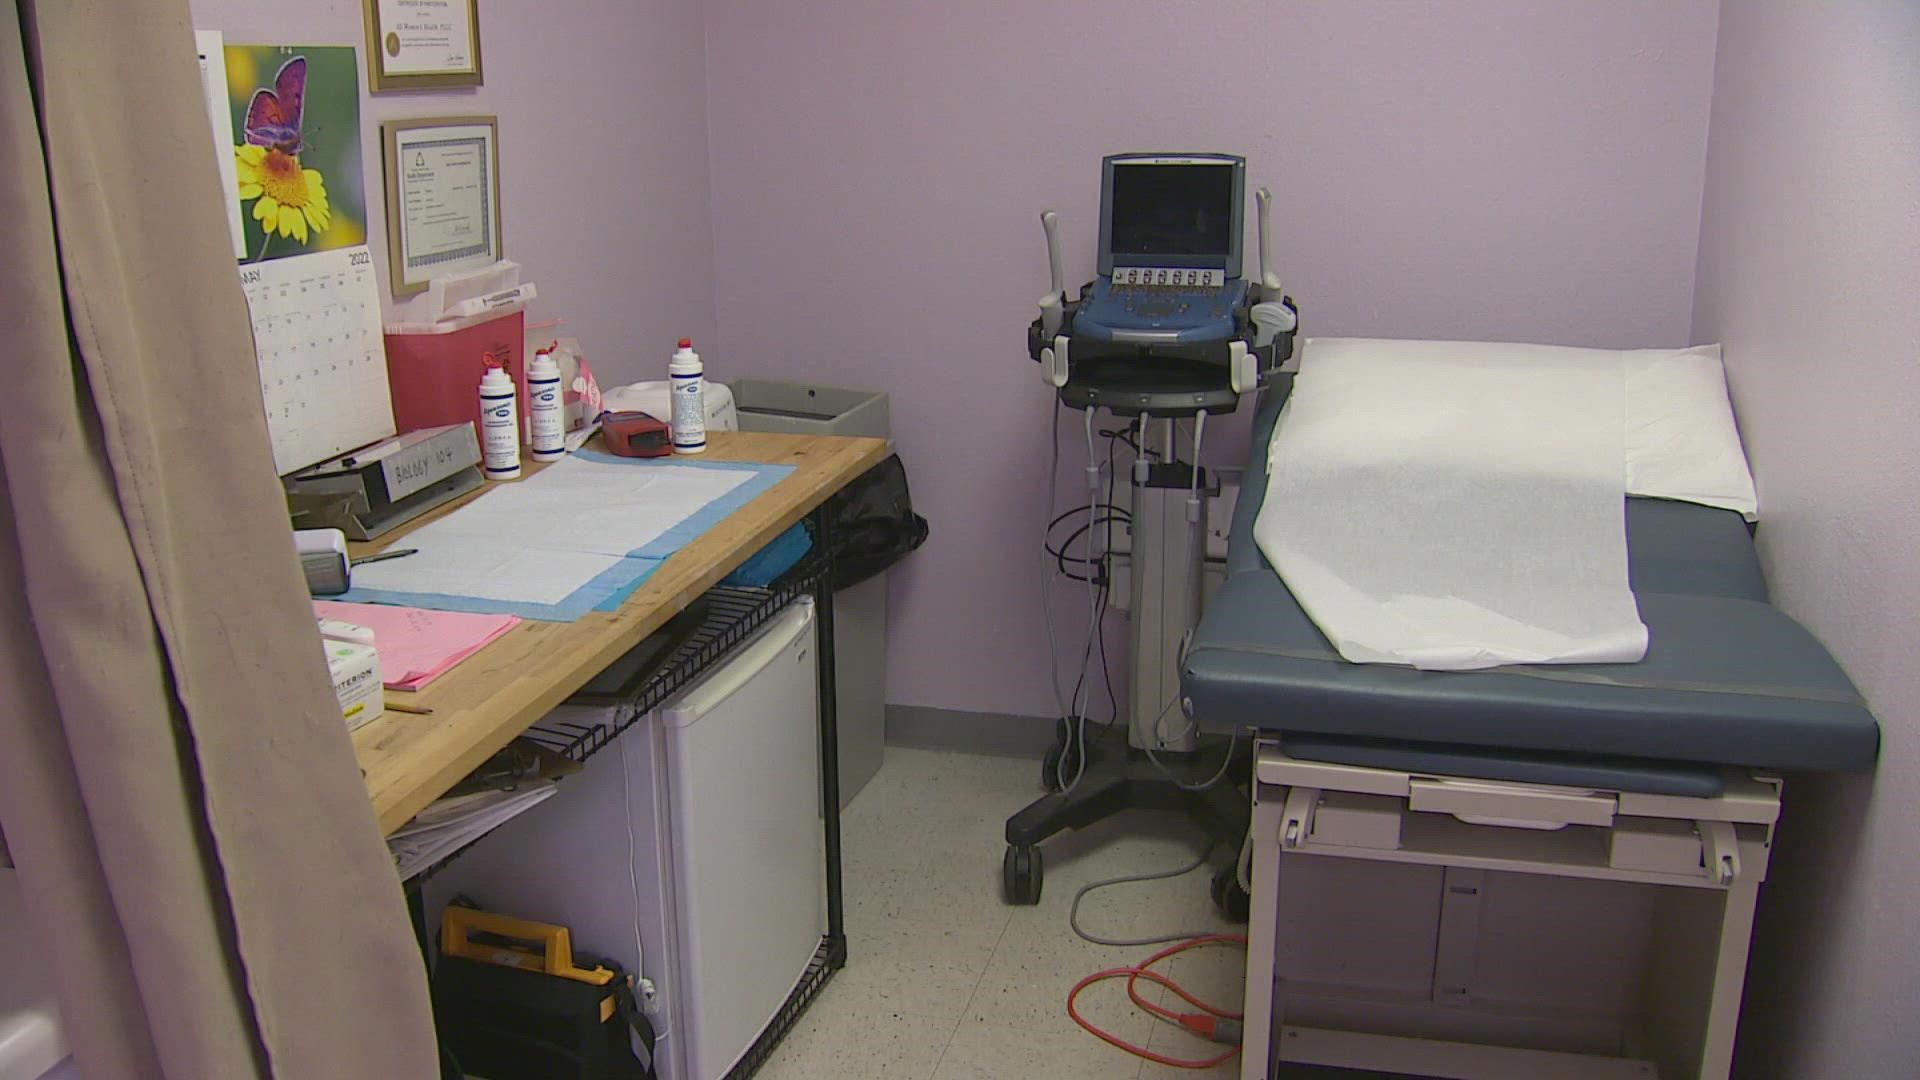 As the fallout from the federal overturn of Roe vs. Wade continues, local clinics are calling for more support.